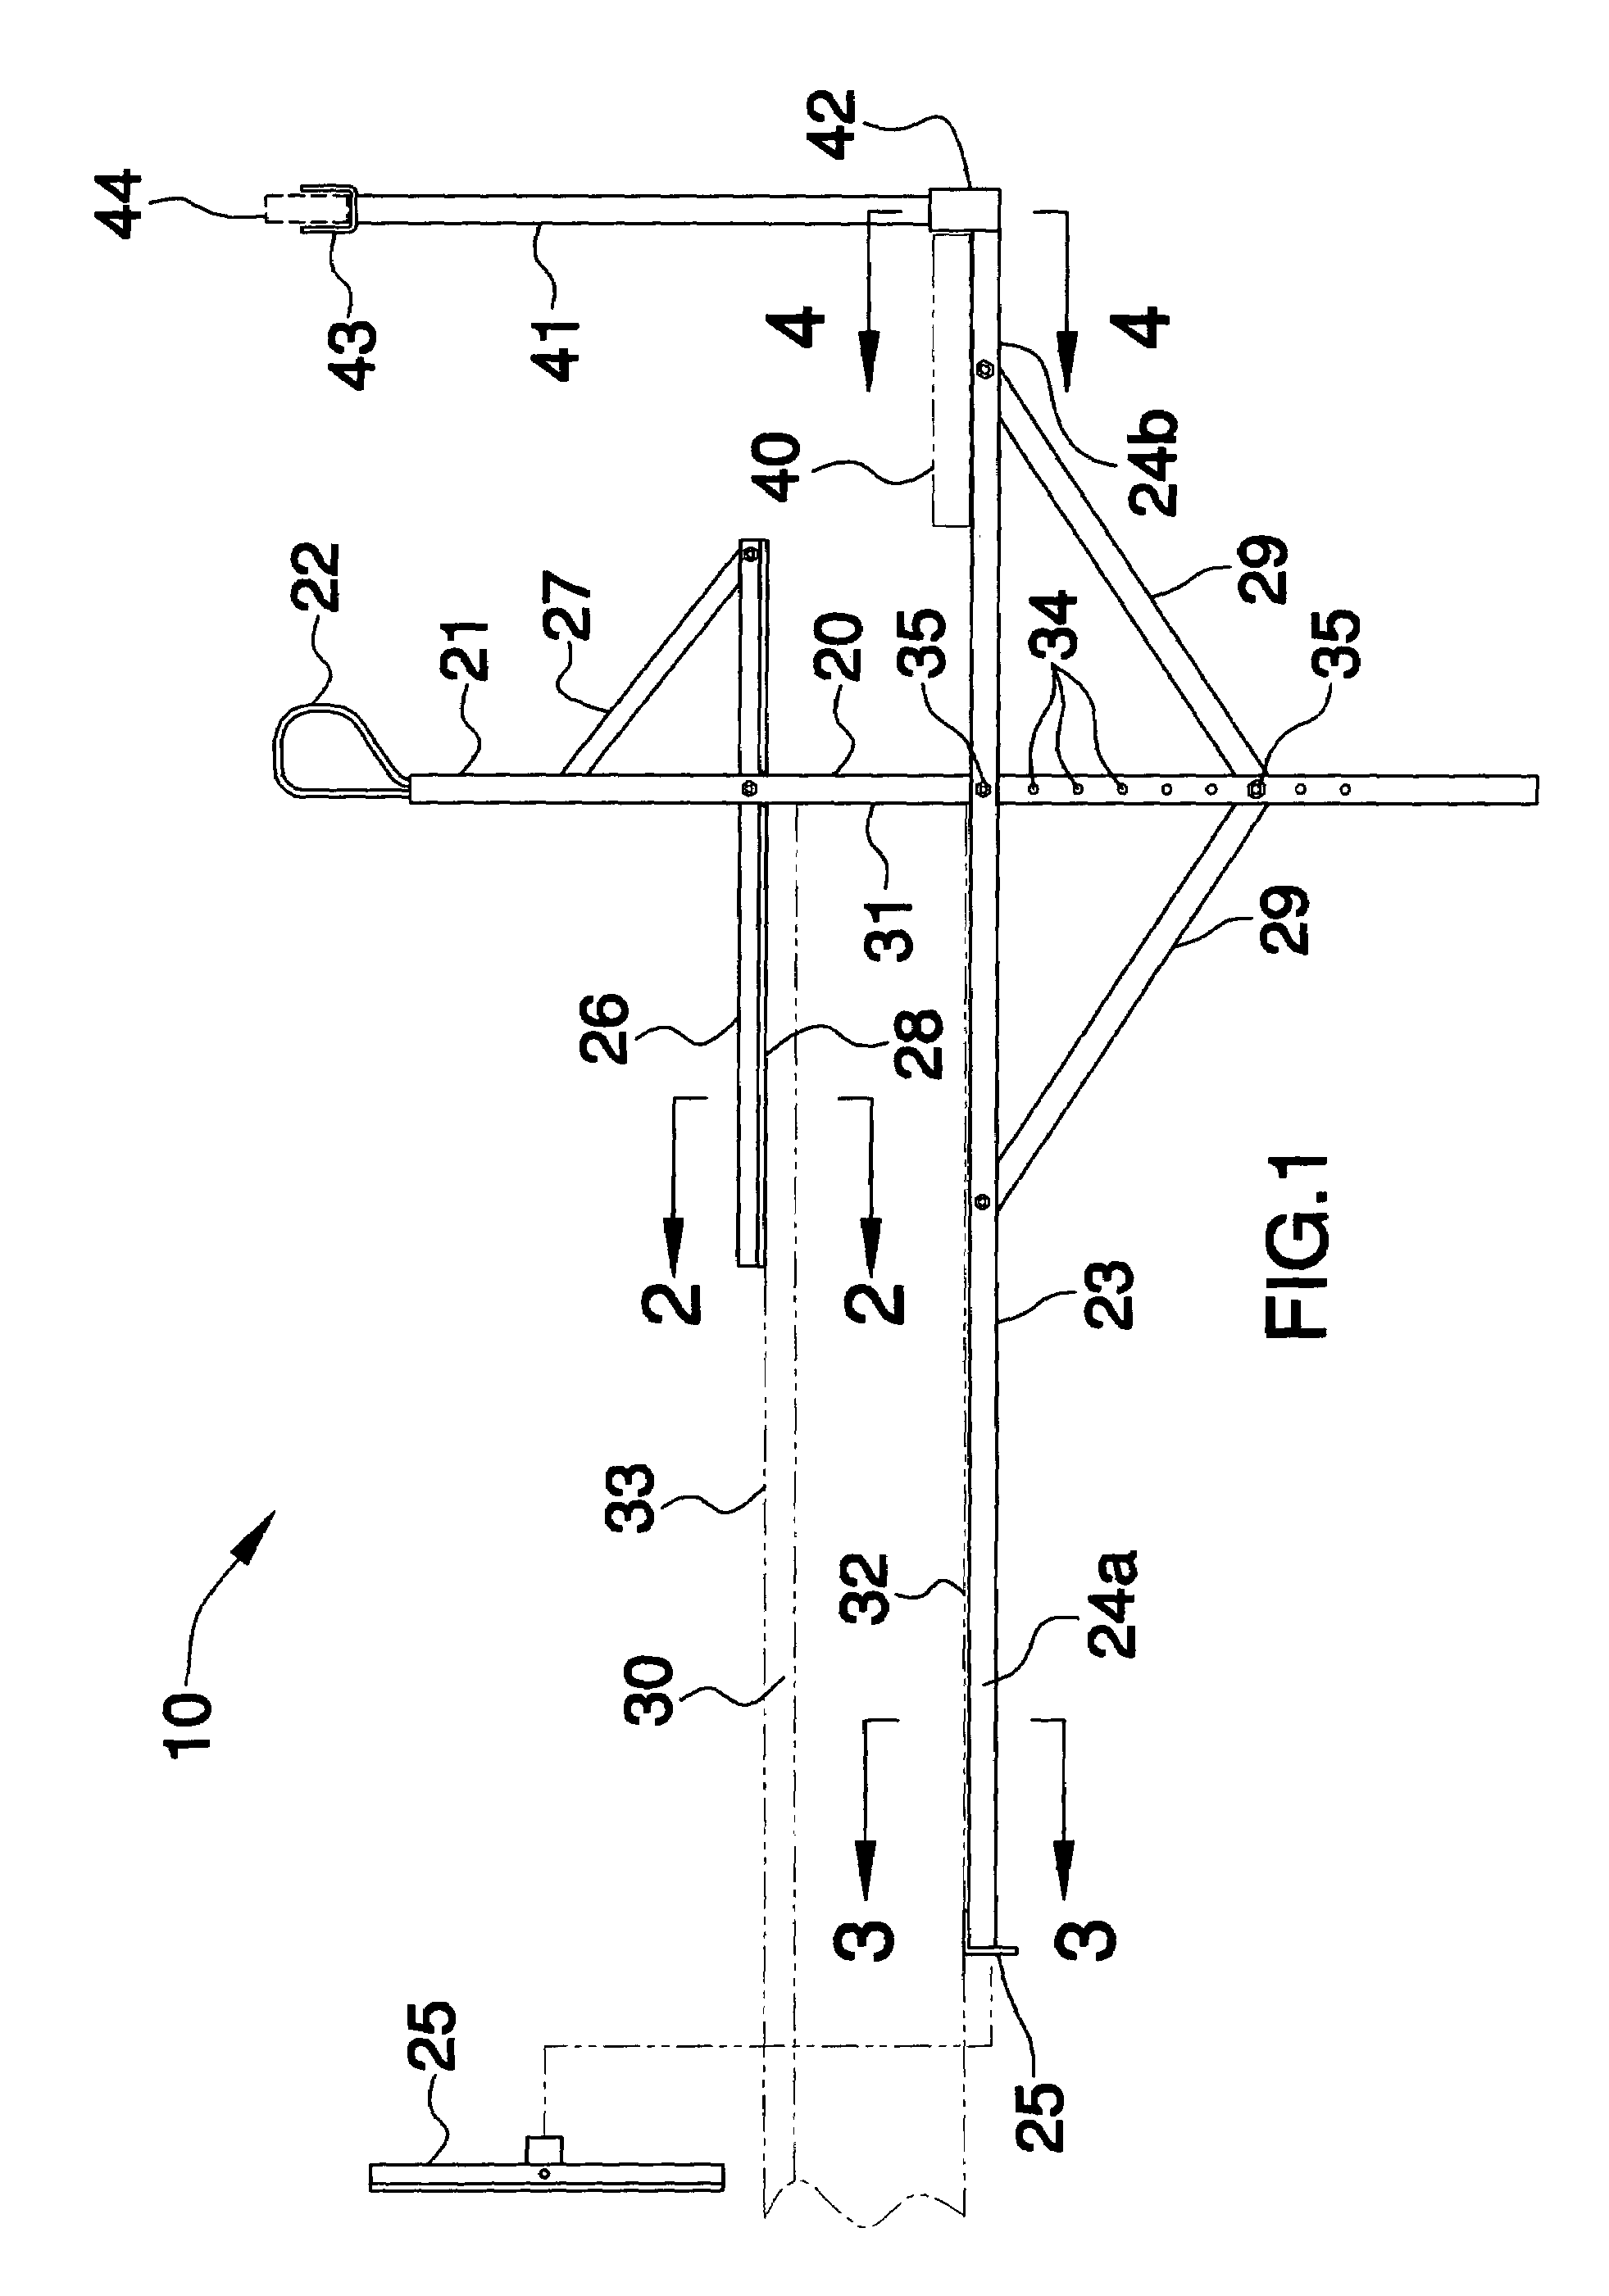 Outrigger assembly for supporting a platform adjacent a work area